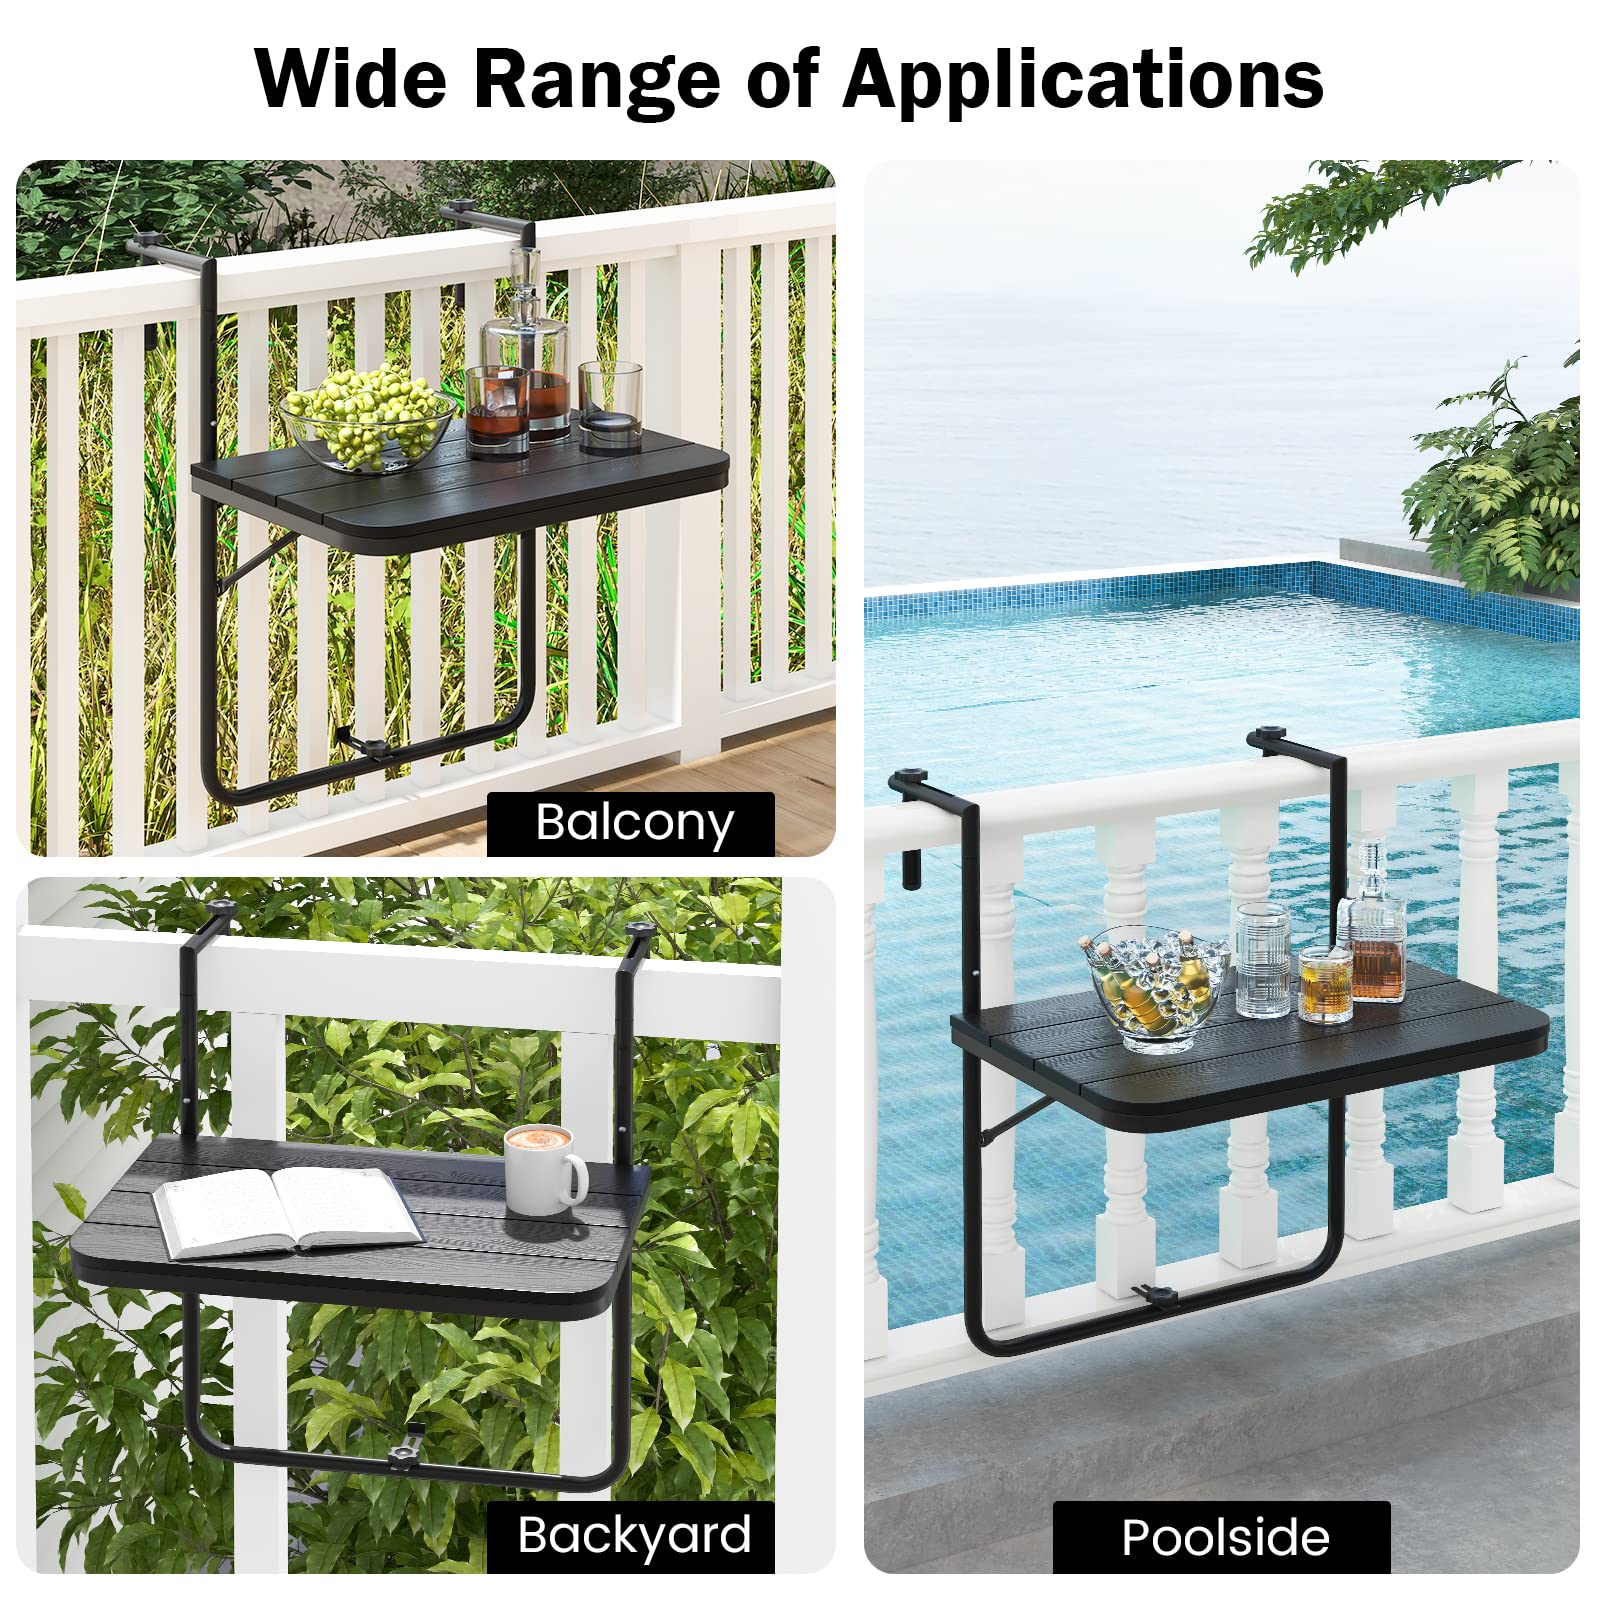 Giantex Outdoor Folding Hanging Table - Balcony Railing Table w/ 3-Level Height